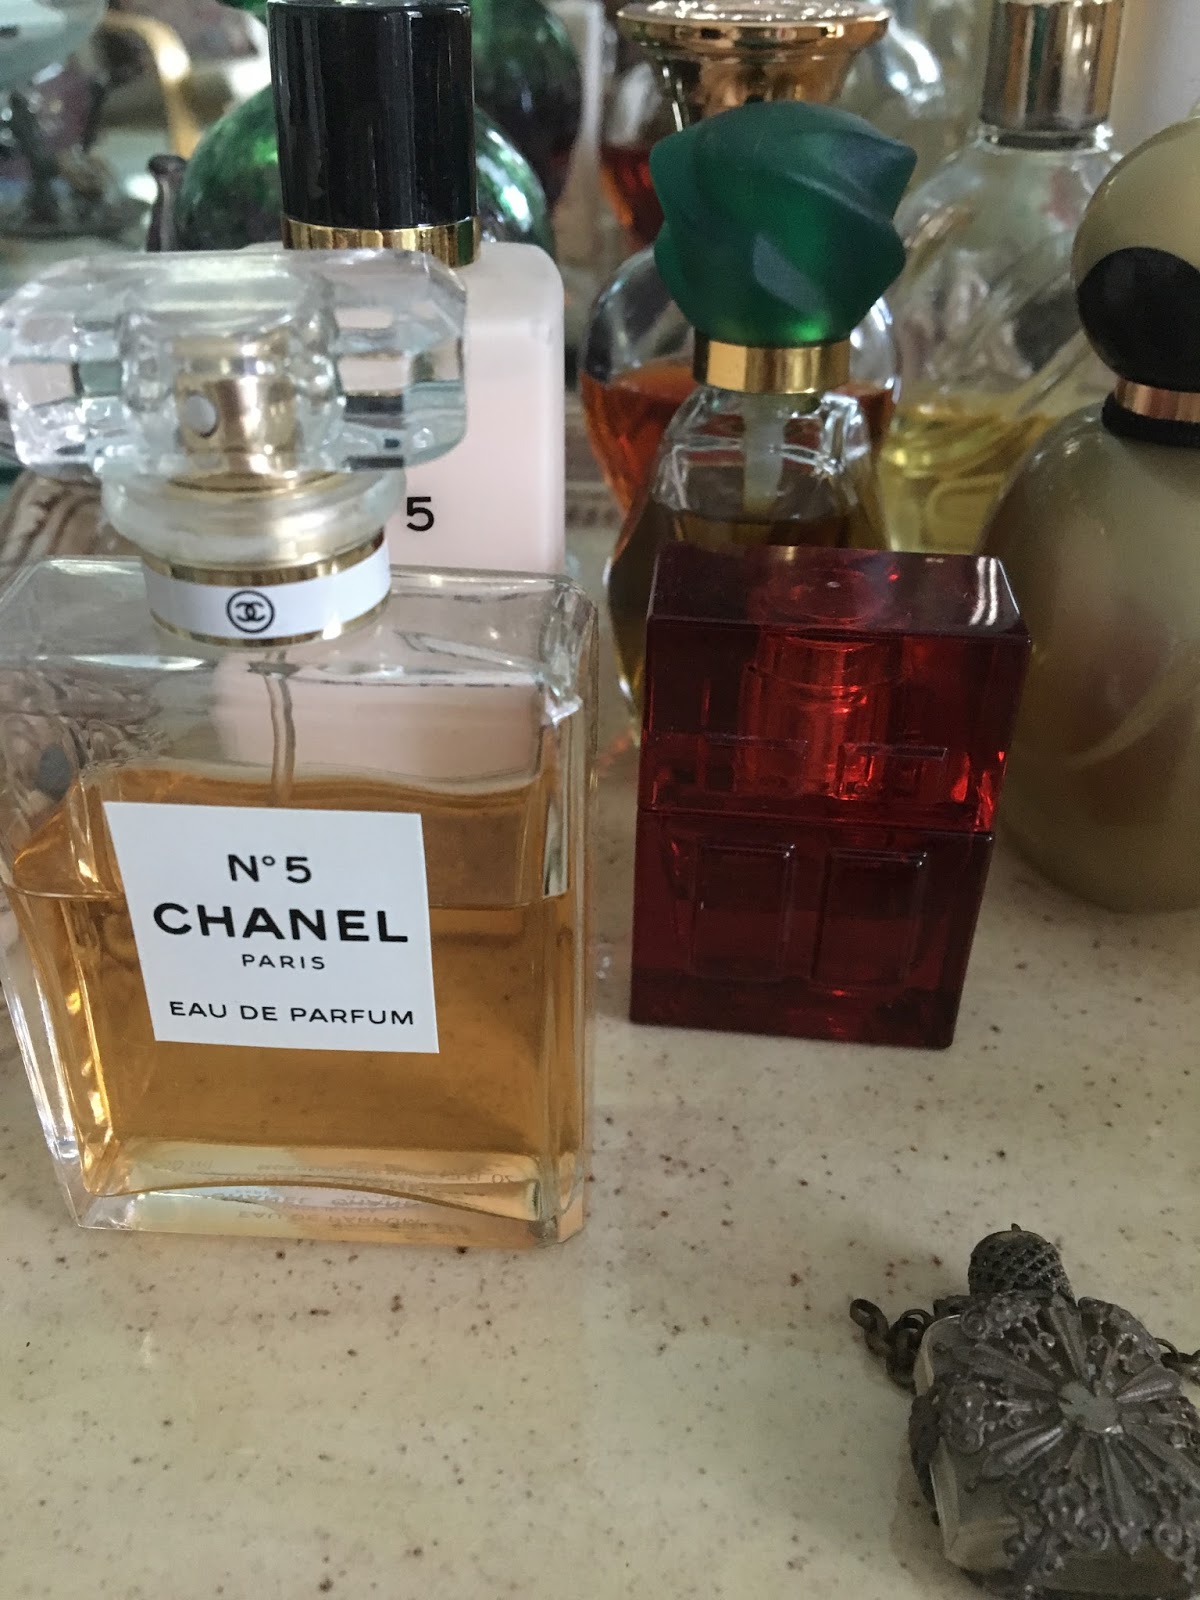 Rice and Beans Vintage Chanel - Shalice Noel